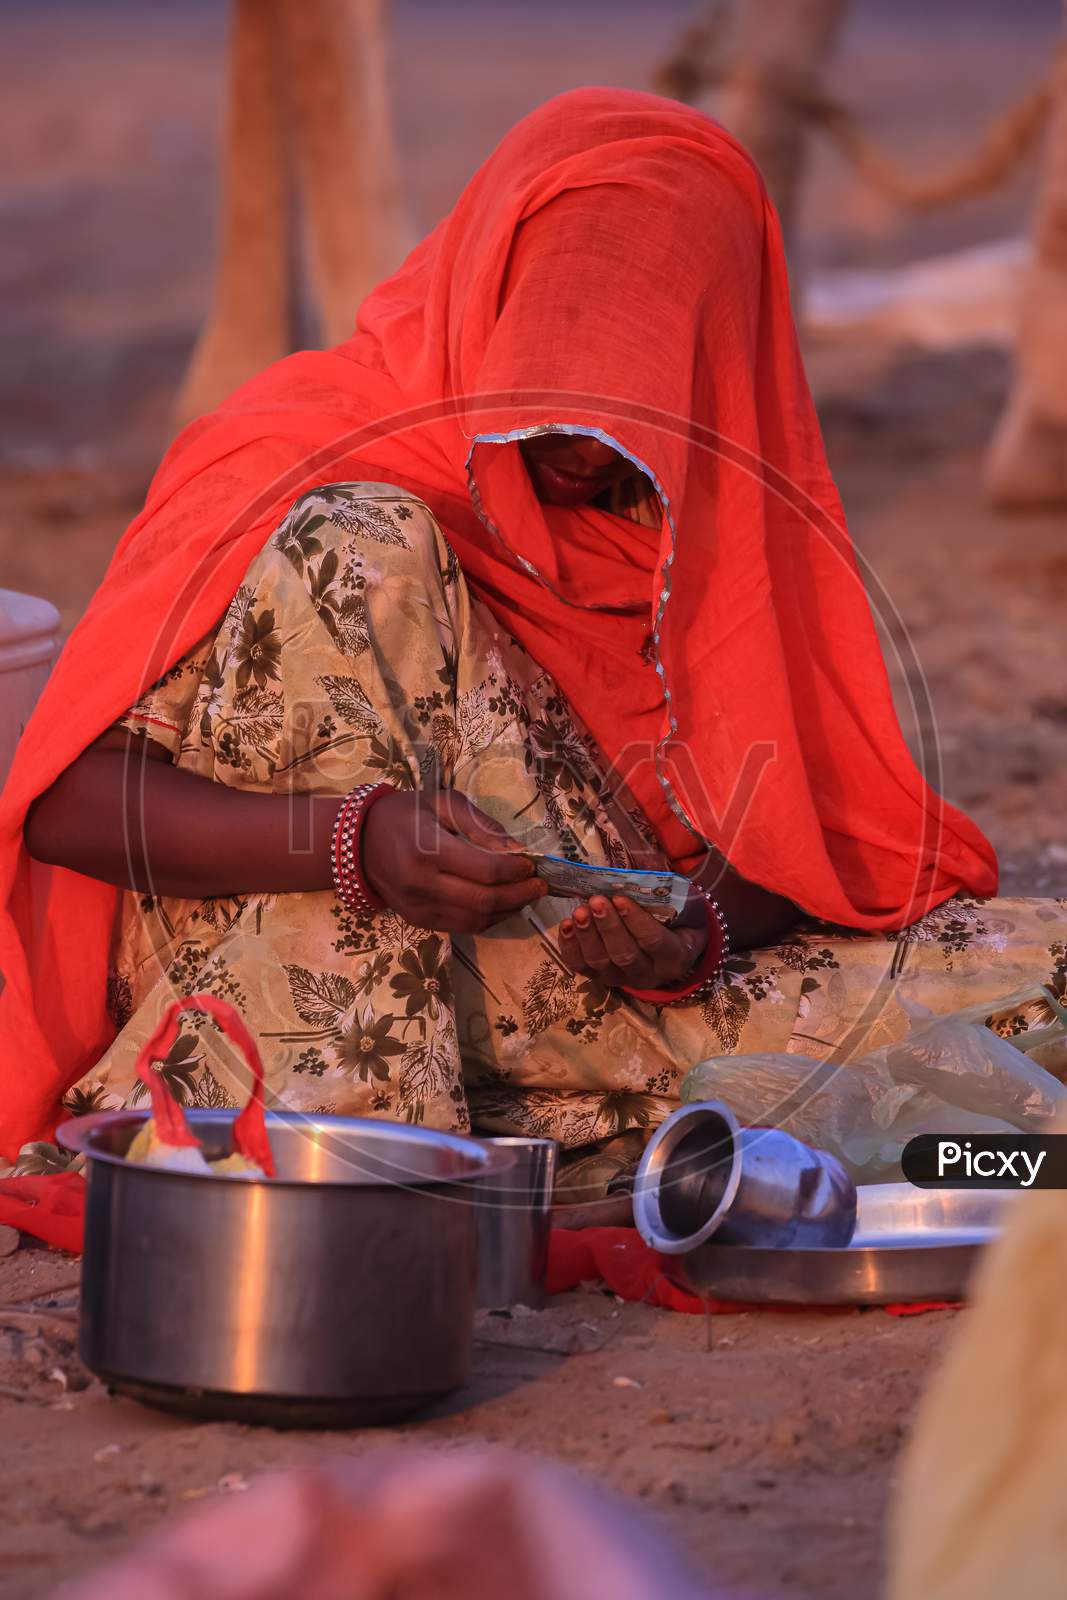 A women wearing an orange traditional Rajasthani dress covering her face and siting on ground